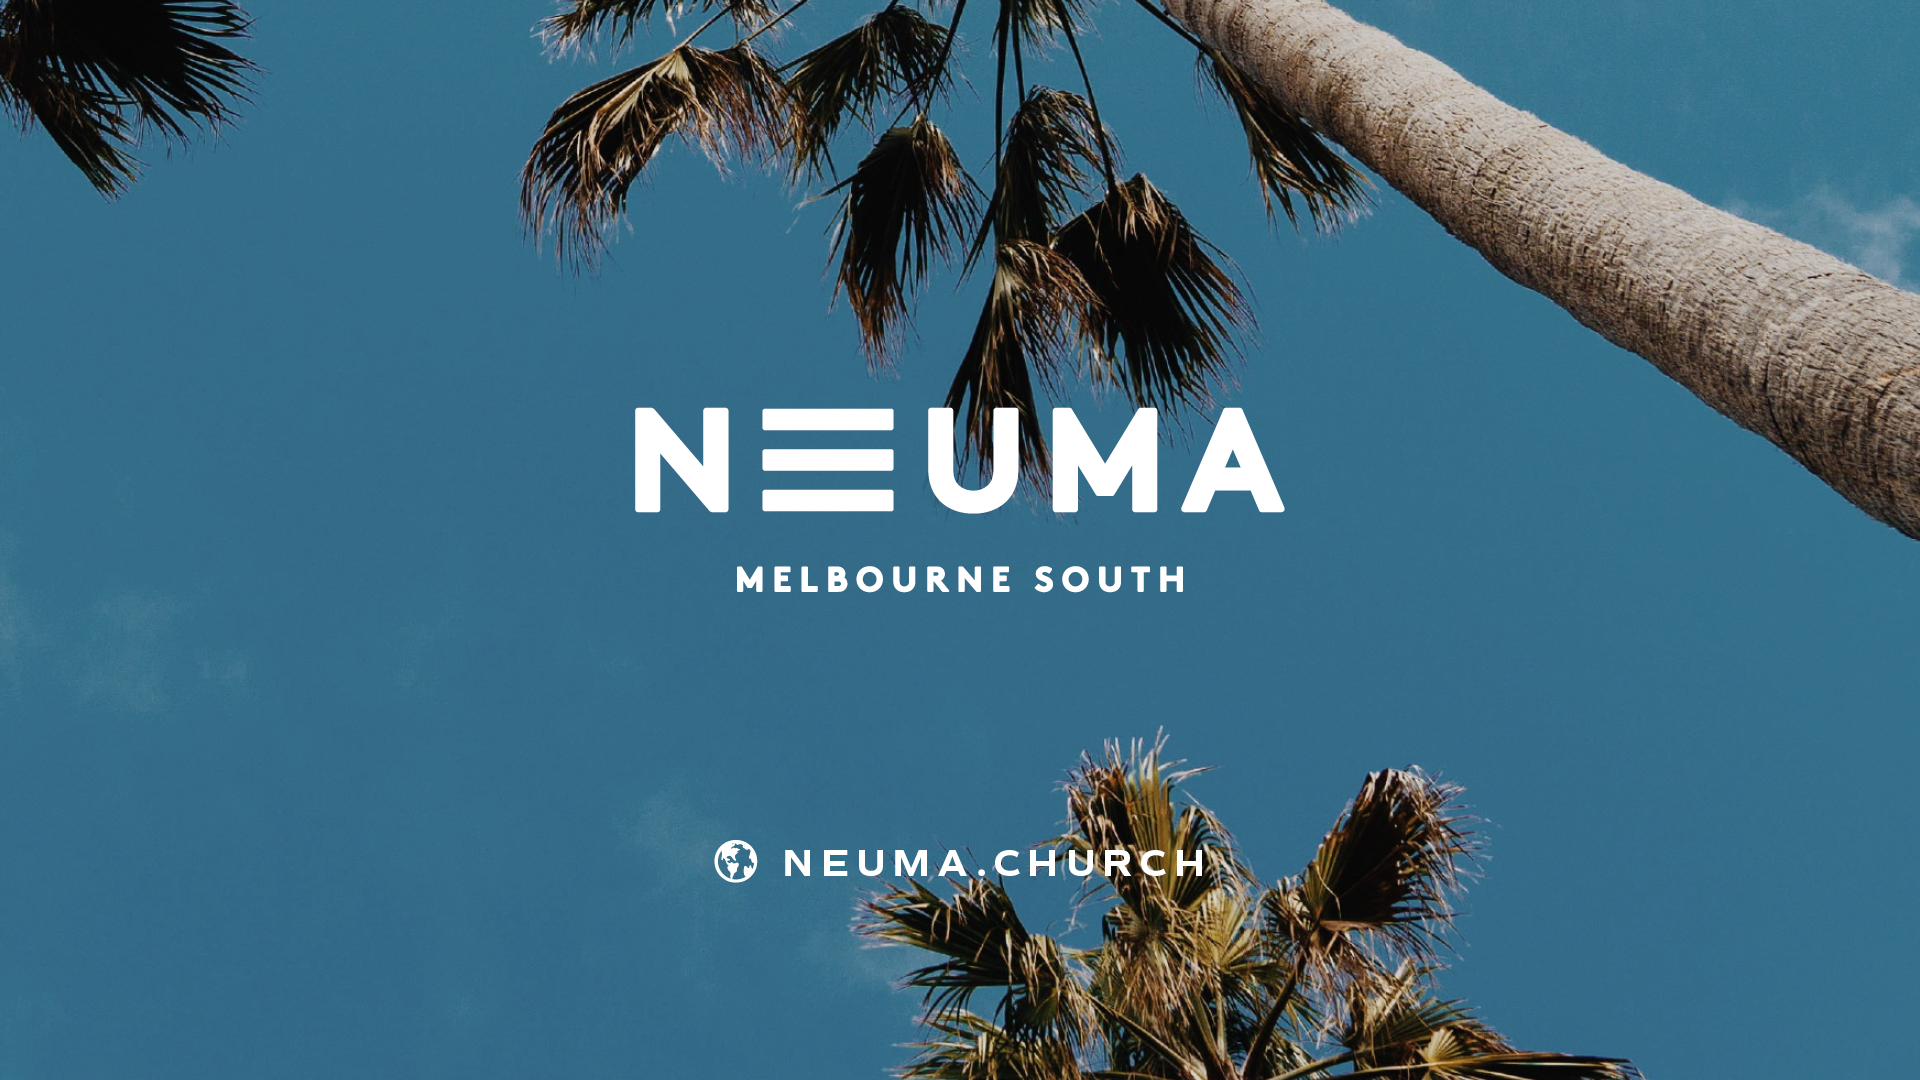 Who Is With You In Suffering? | Ps Steve Alphine | Neuma Church Melbourne South